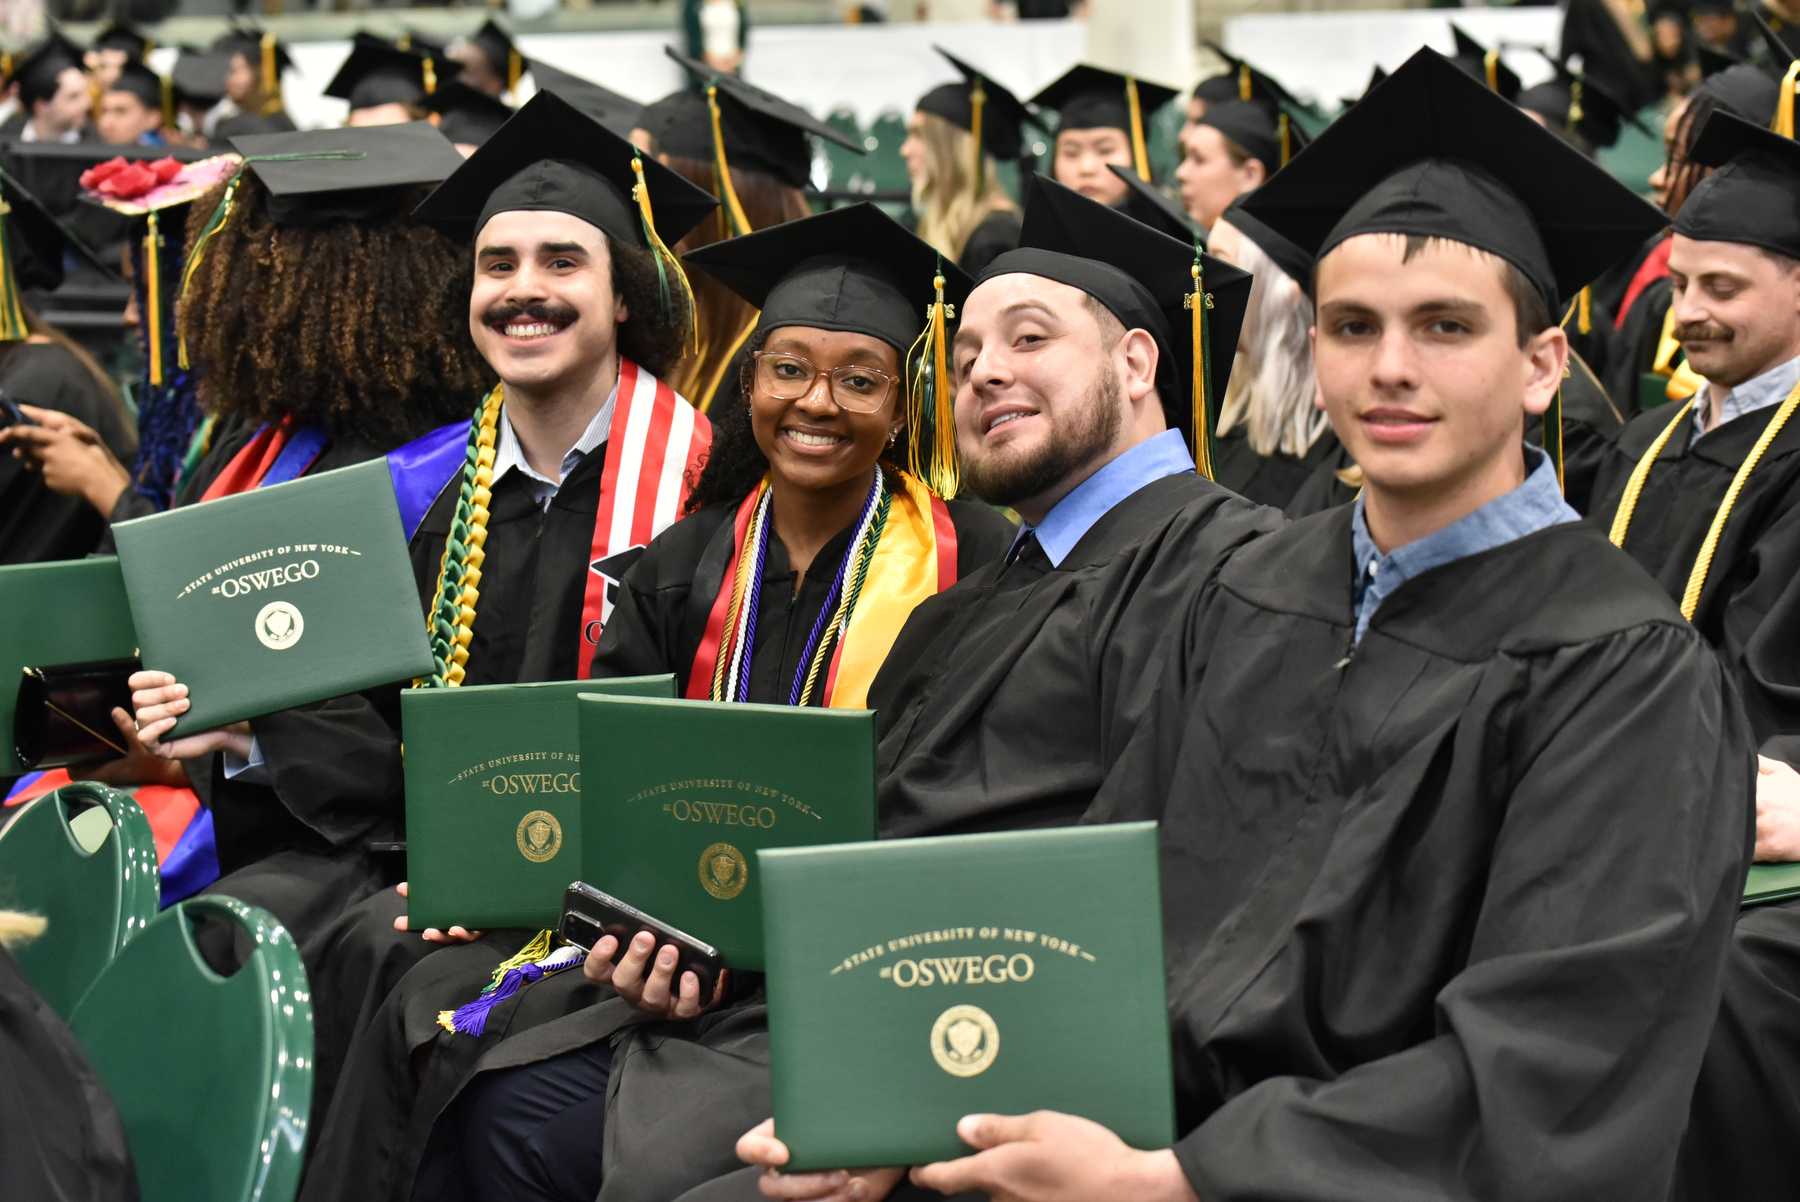 School of Business graduates show their joy near the end of the ceremony.